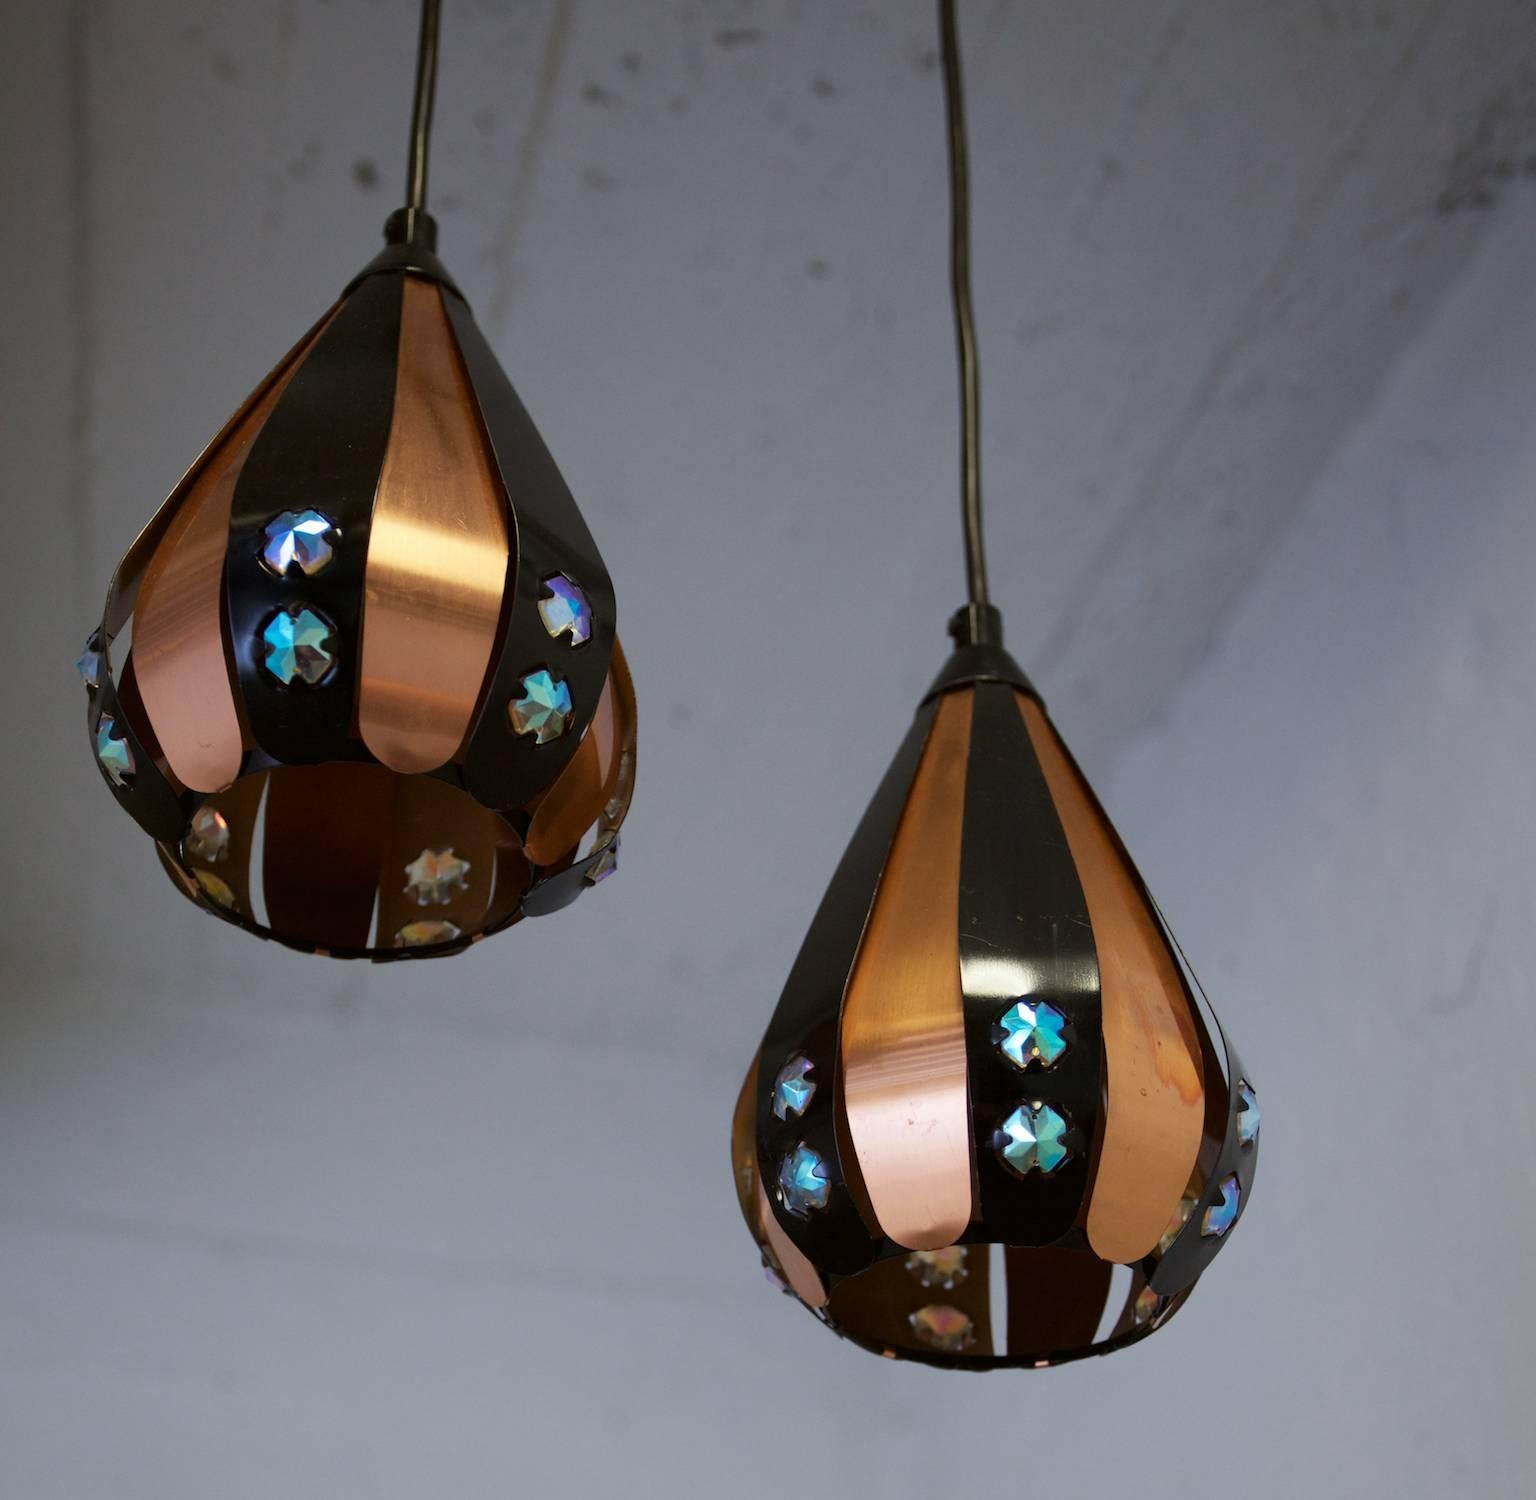 These very cool pendants in copper and black, decorated with prisms by Werner Schou for Coronell Elektro, 1960s-1970s, Denmark. This small pendants where often placed in windows and connected to a wall outlet. "Werner Schou, (Werner Hugo August